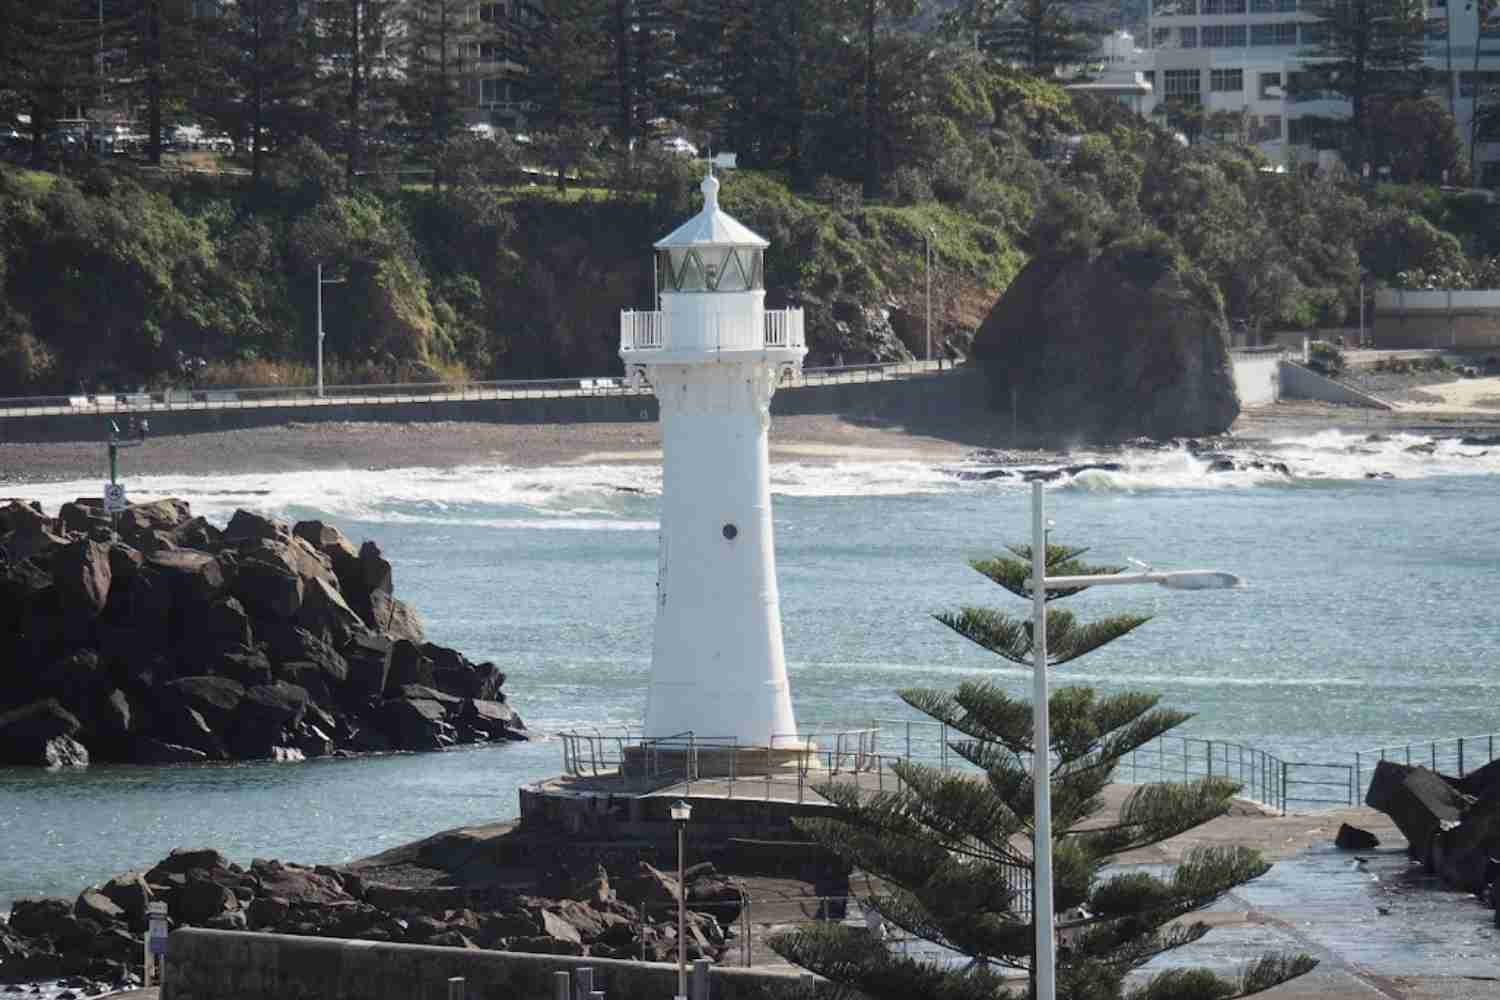 Beaches to explore in Wollongong